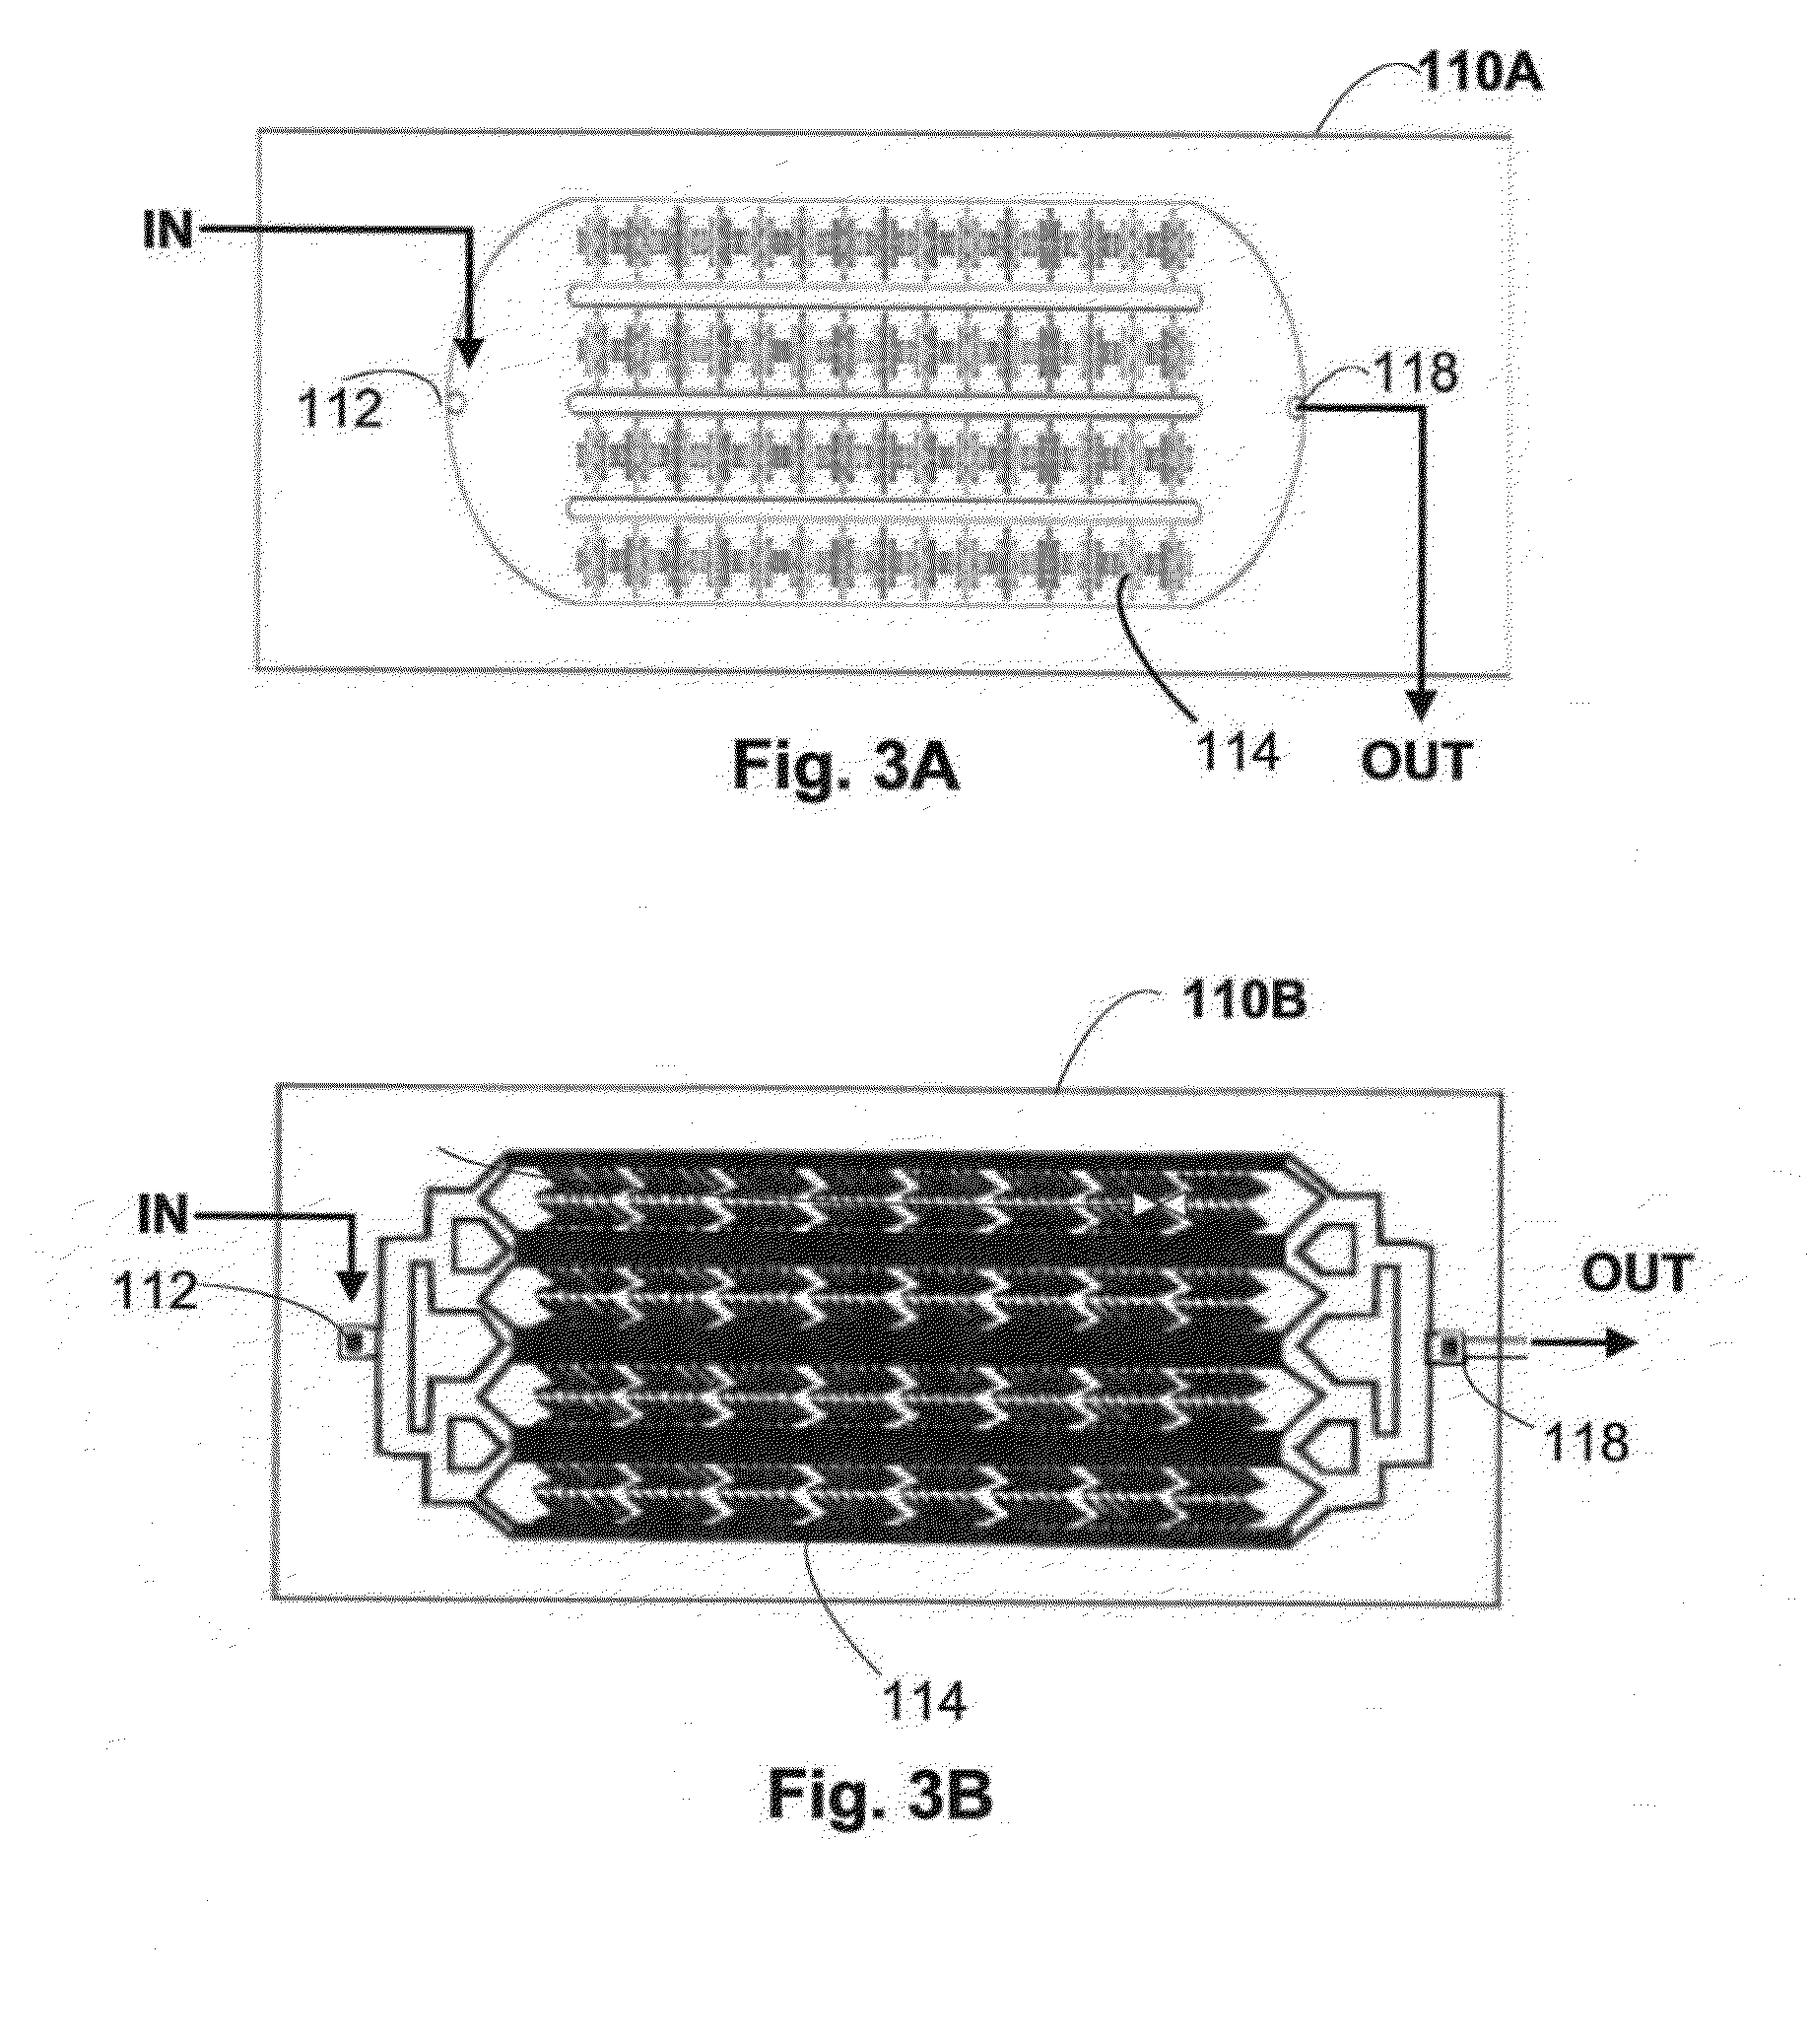 Collection and Concentration System for Biologic Substance of Interest and Use Thereof